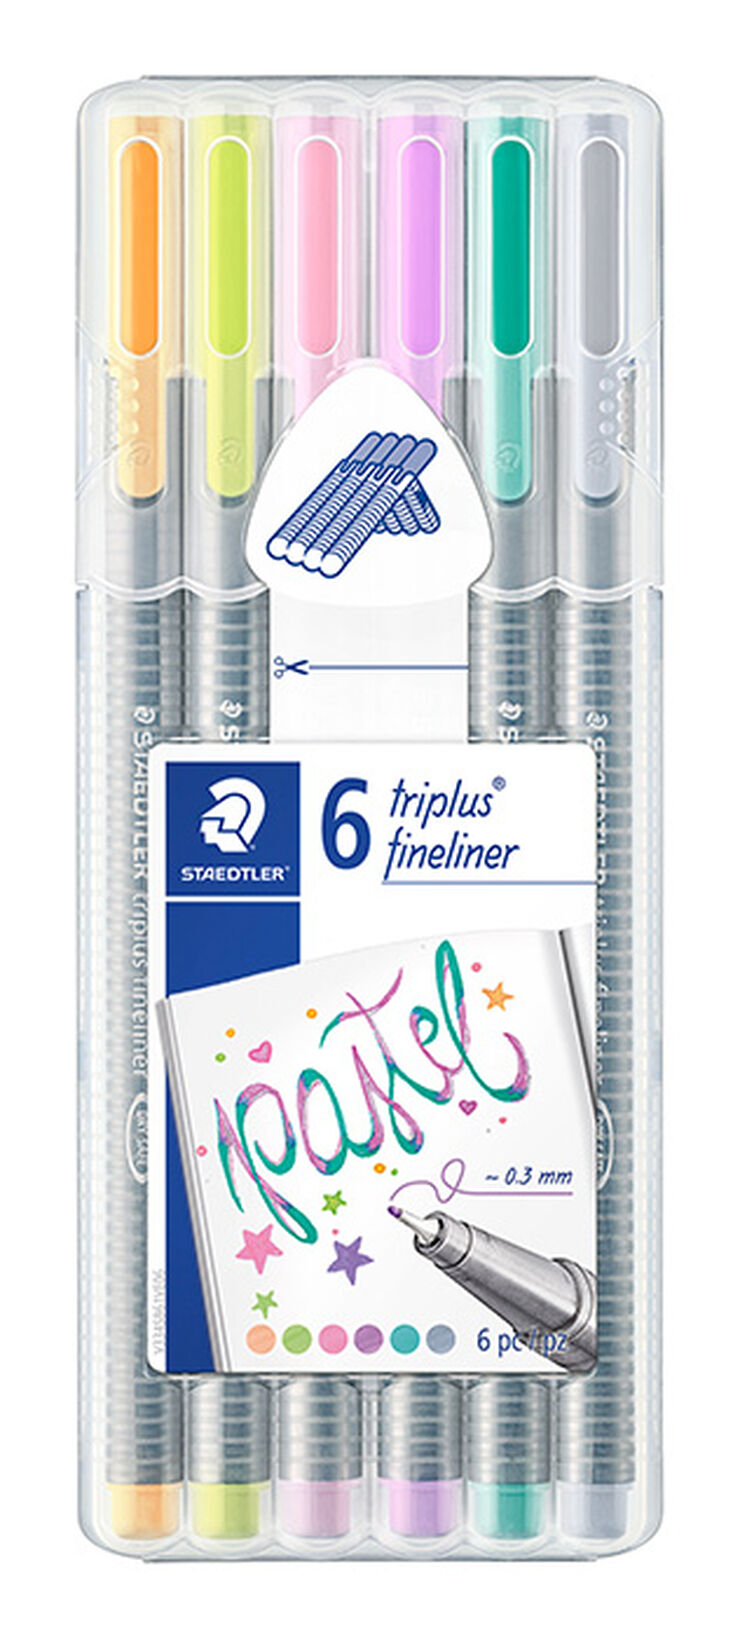 Rotuladores Triplus Pastel, 6 colores - Abacus Online